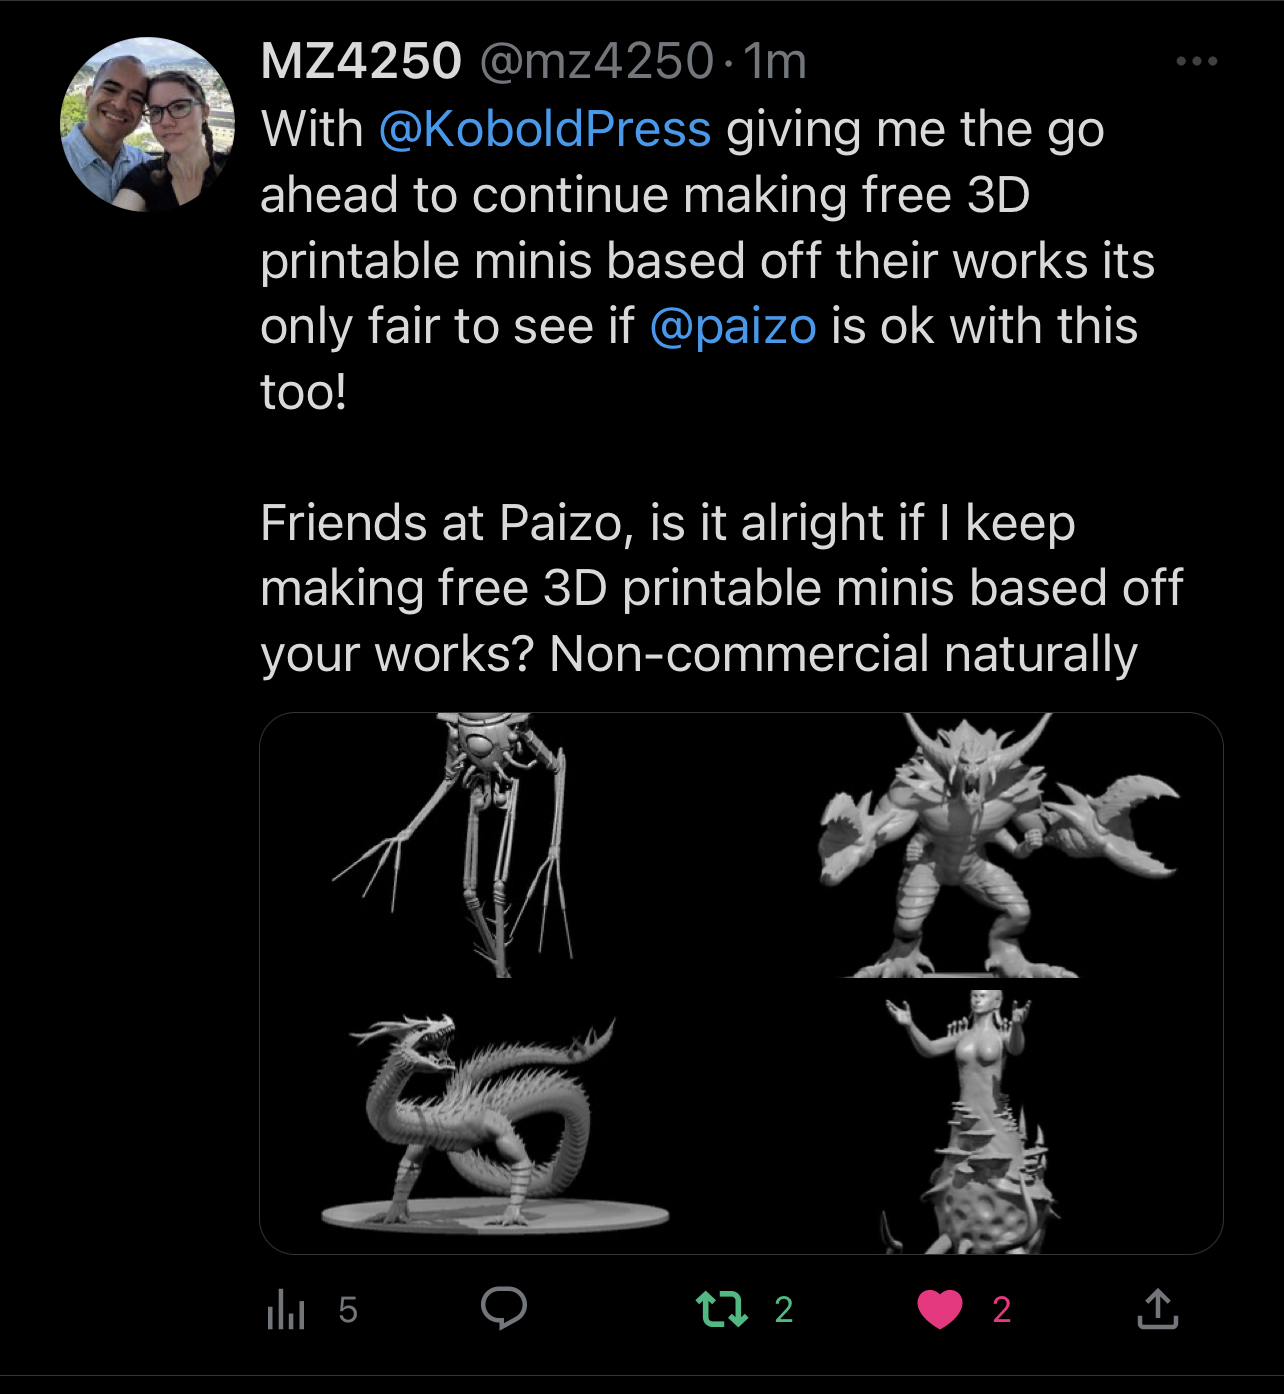 With @KoboldPress giving me the go ahead to continue making free 3D printable minis based off their works its only fair to see if @paizo is ok with this too! Friends at Paizo, is it alright if I keep making free 3D printable minis based off your works? Non-commercial naturally